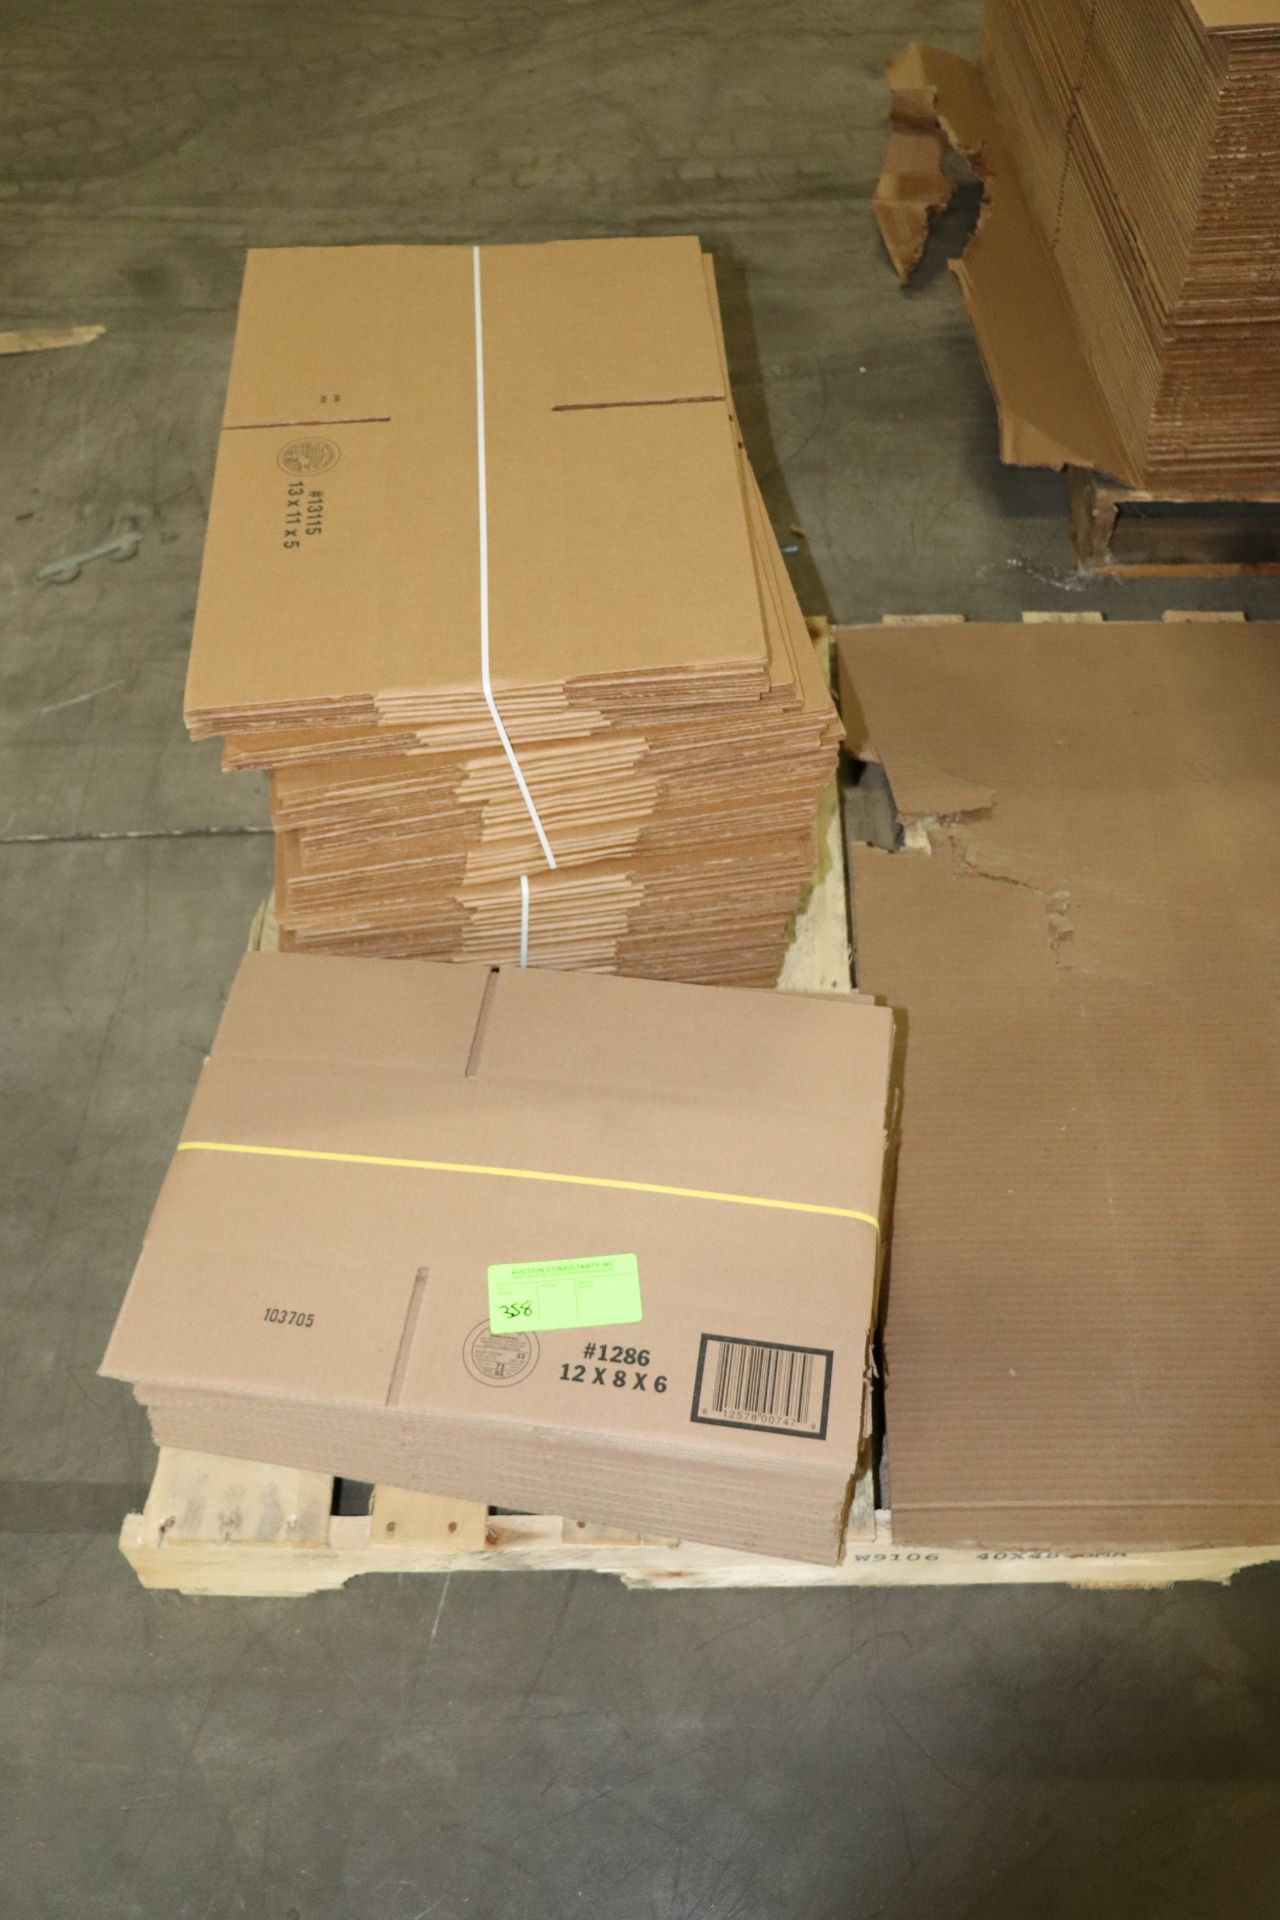 Pallet of boxes, 12" x 8" x 6" and 13" x 11" x 5"